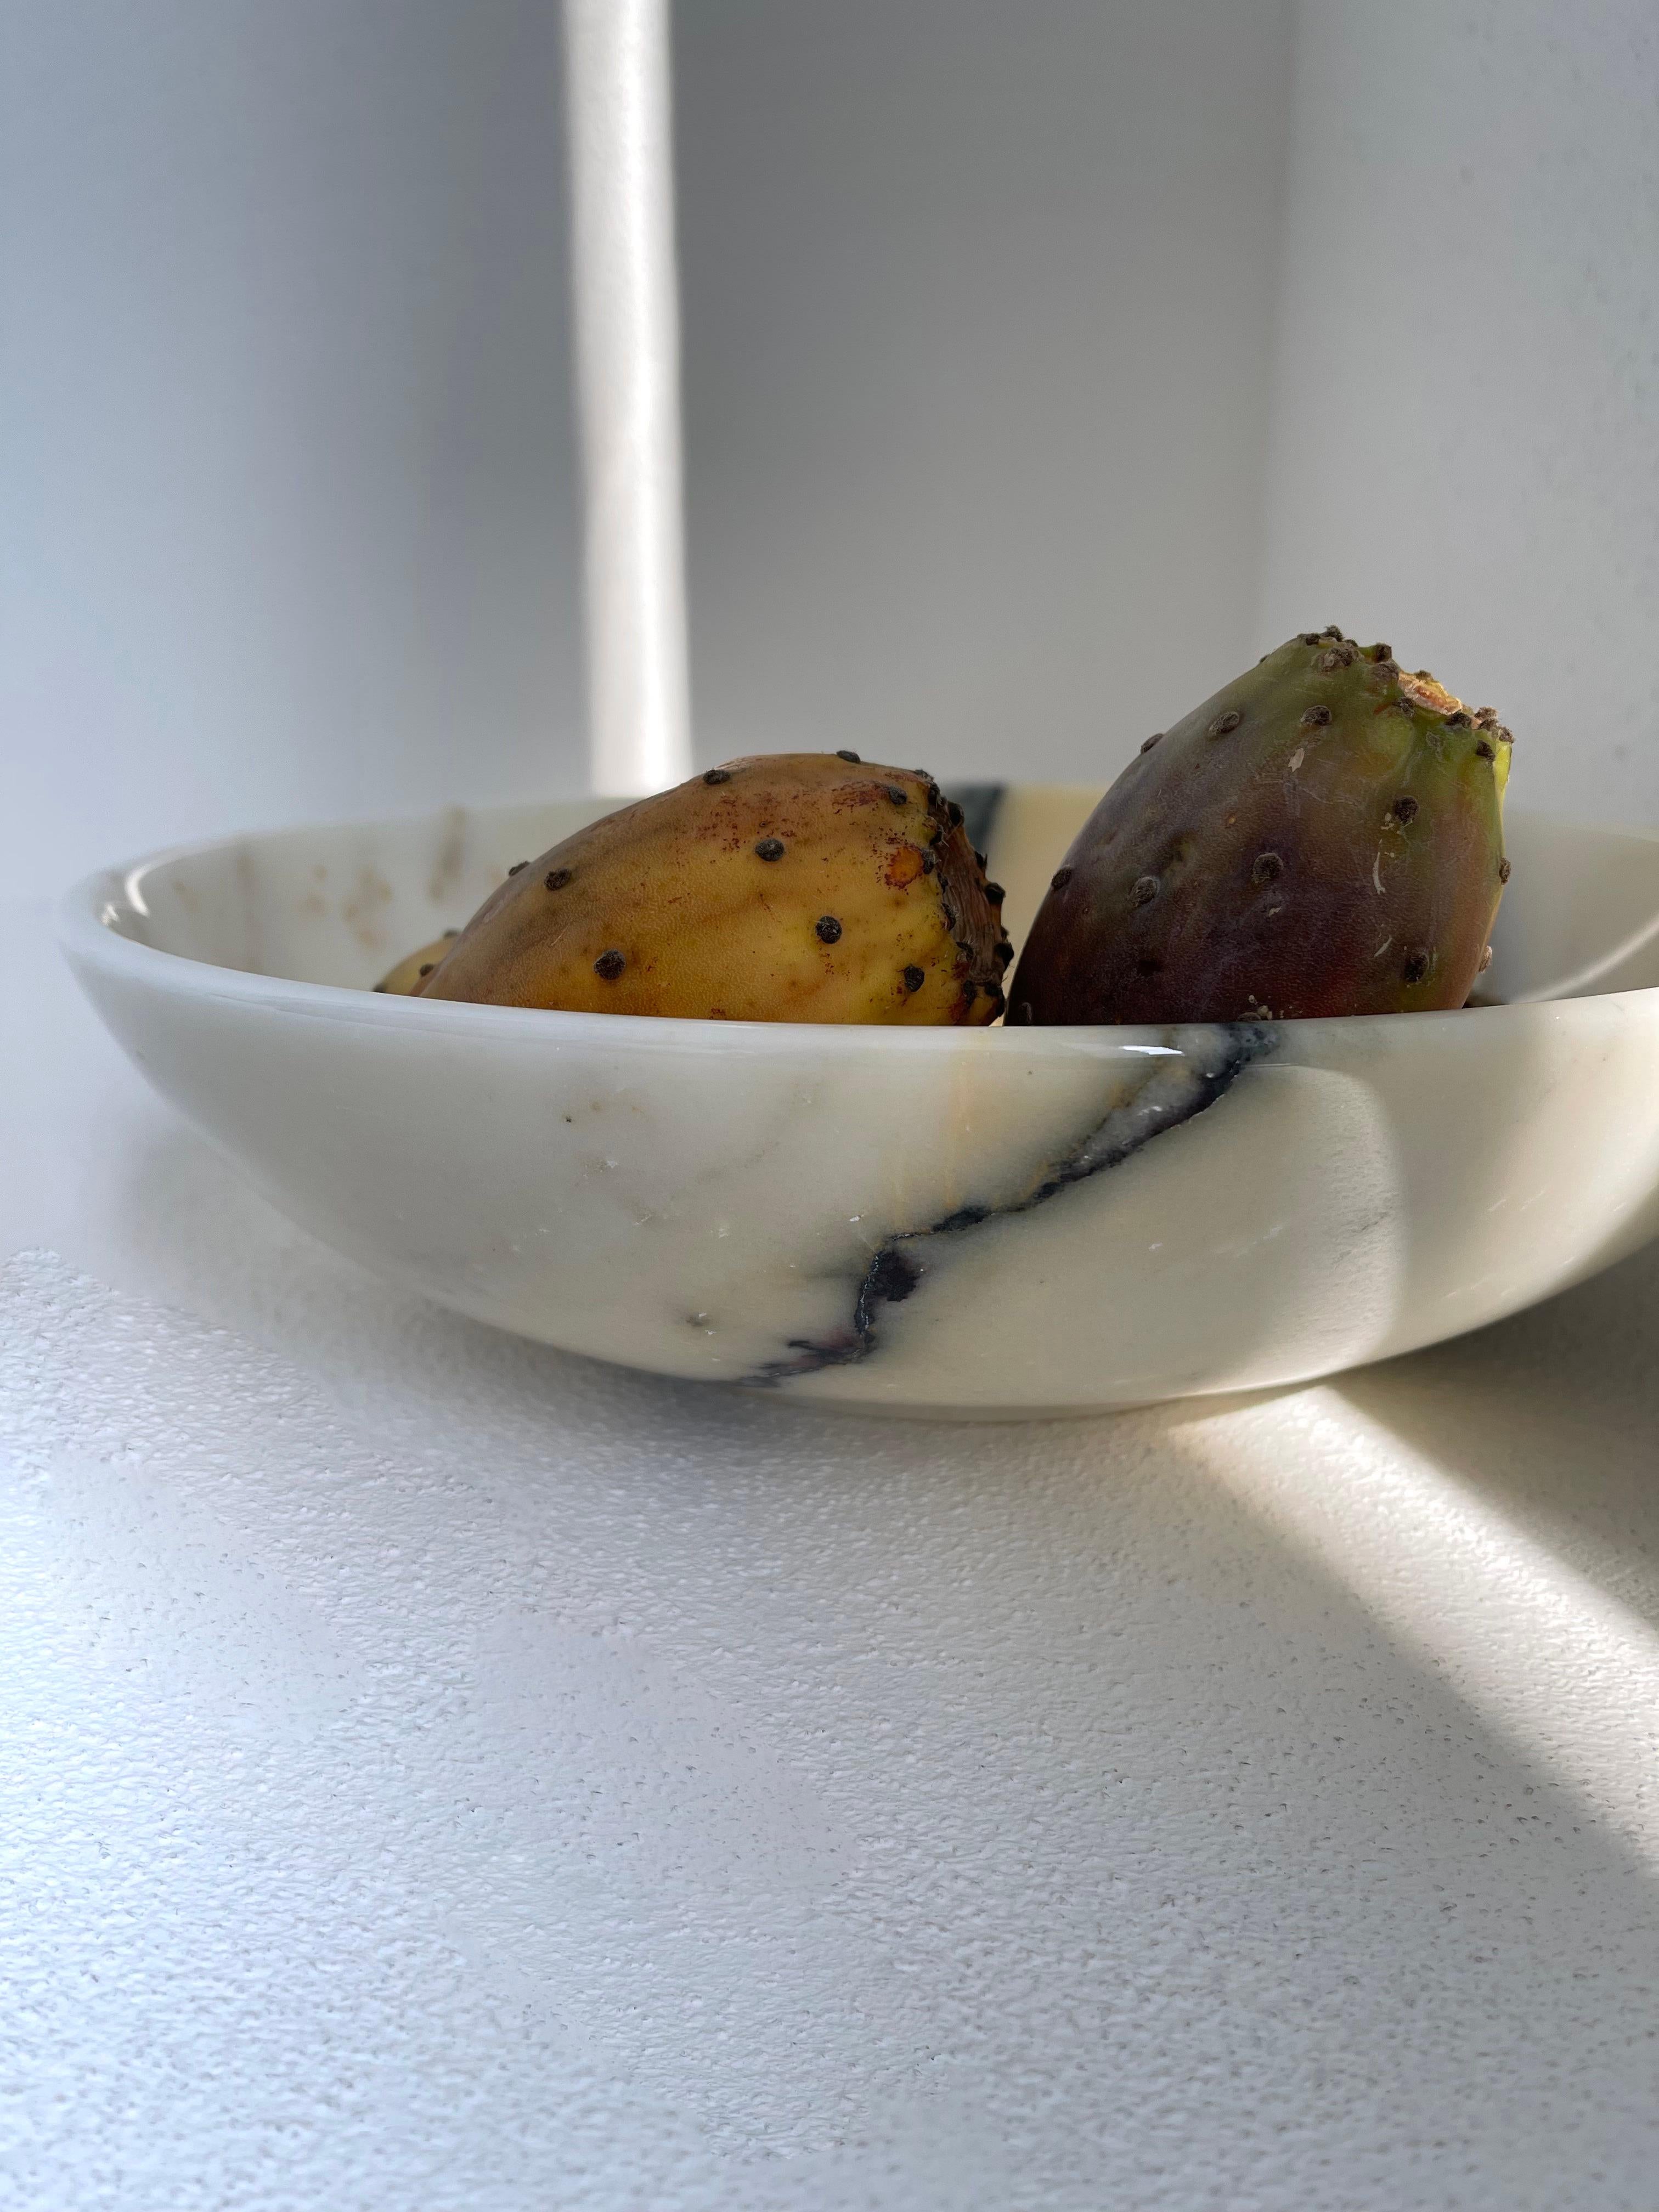 Handmade Small Fruit Bowl in Paonazzo Marble 2